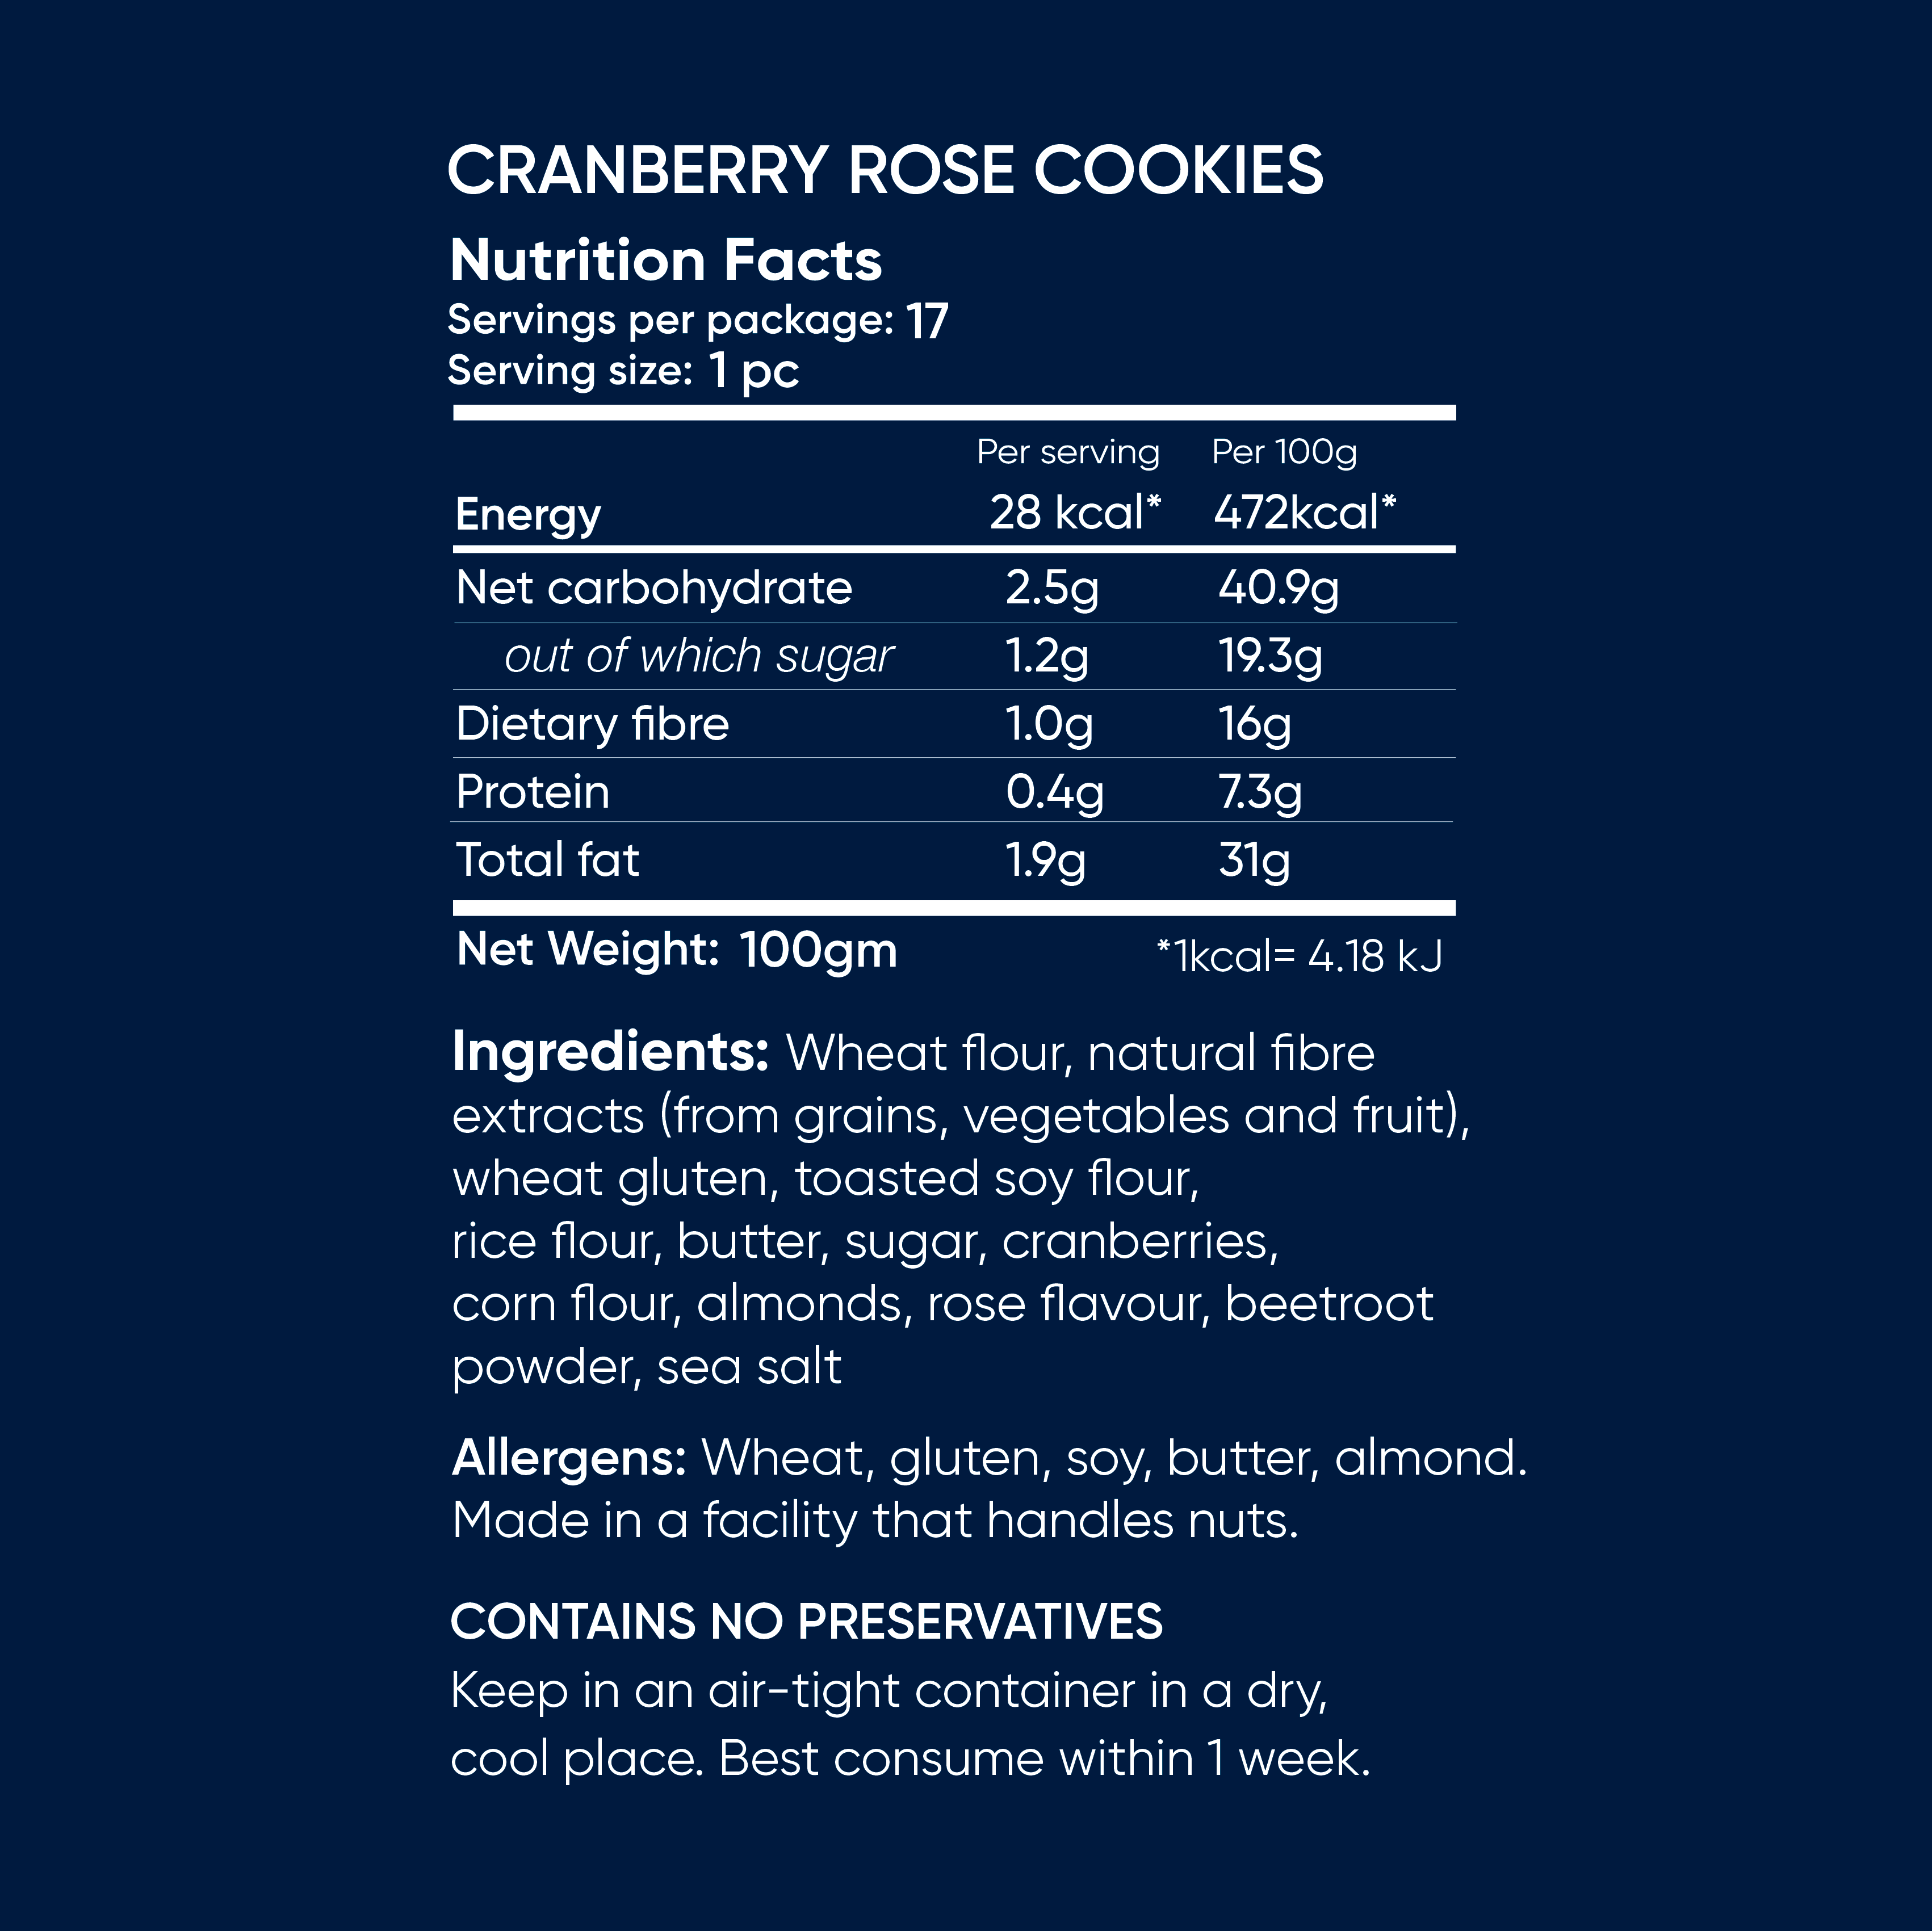 Cranberry Rose Cookies